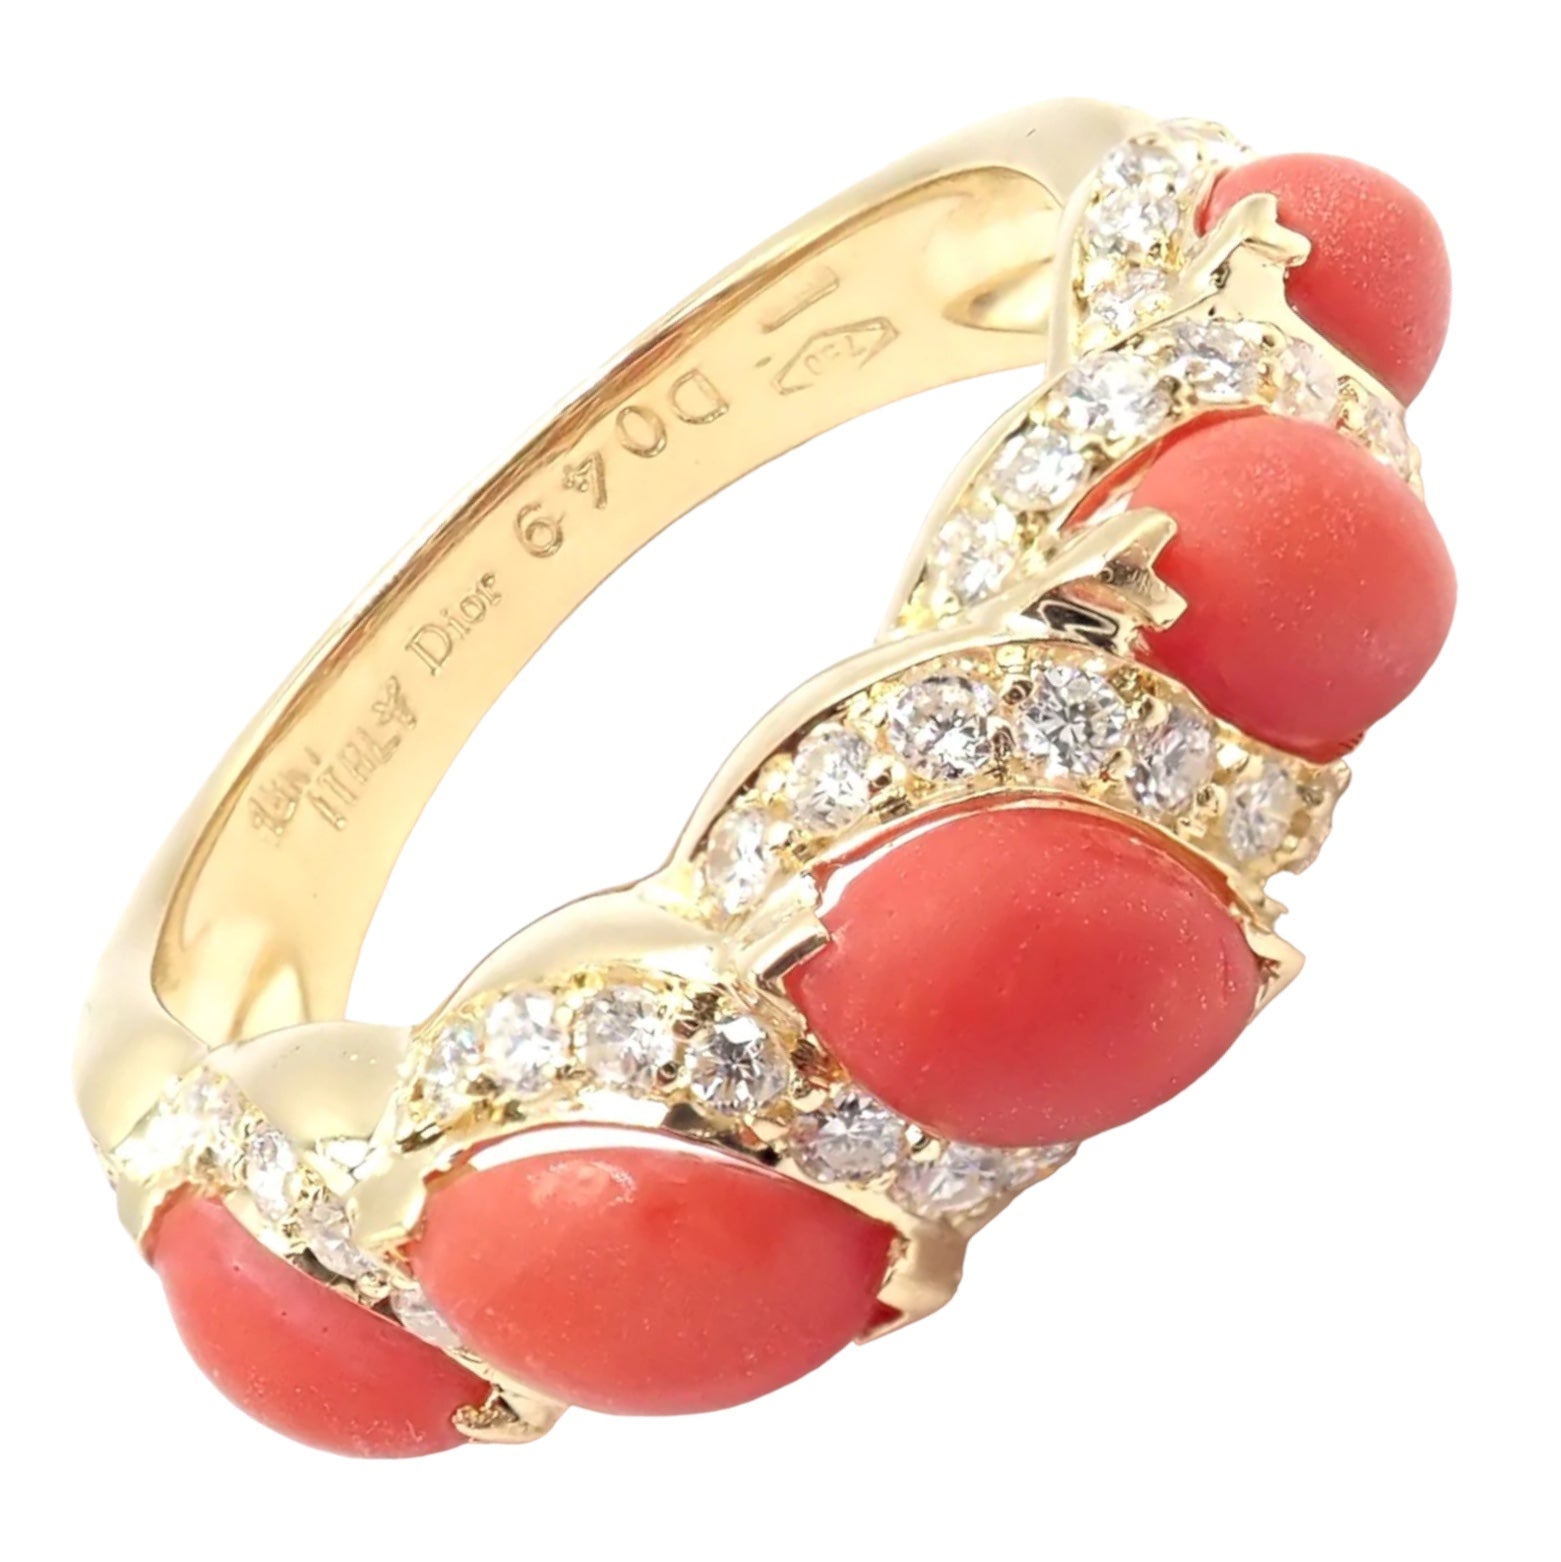 Rare! Authentic Christian Dior 18k Yellow Gold Diamond Coral Band Ring